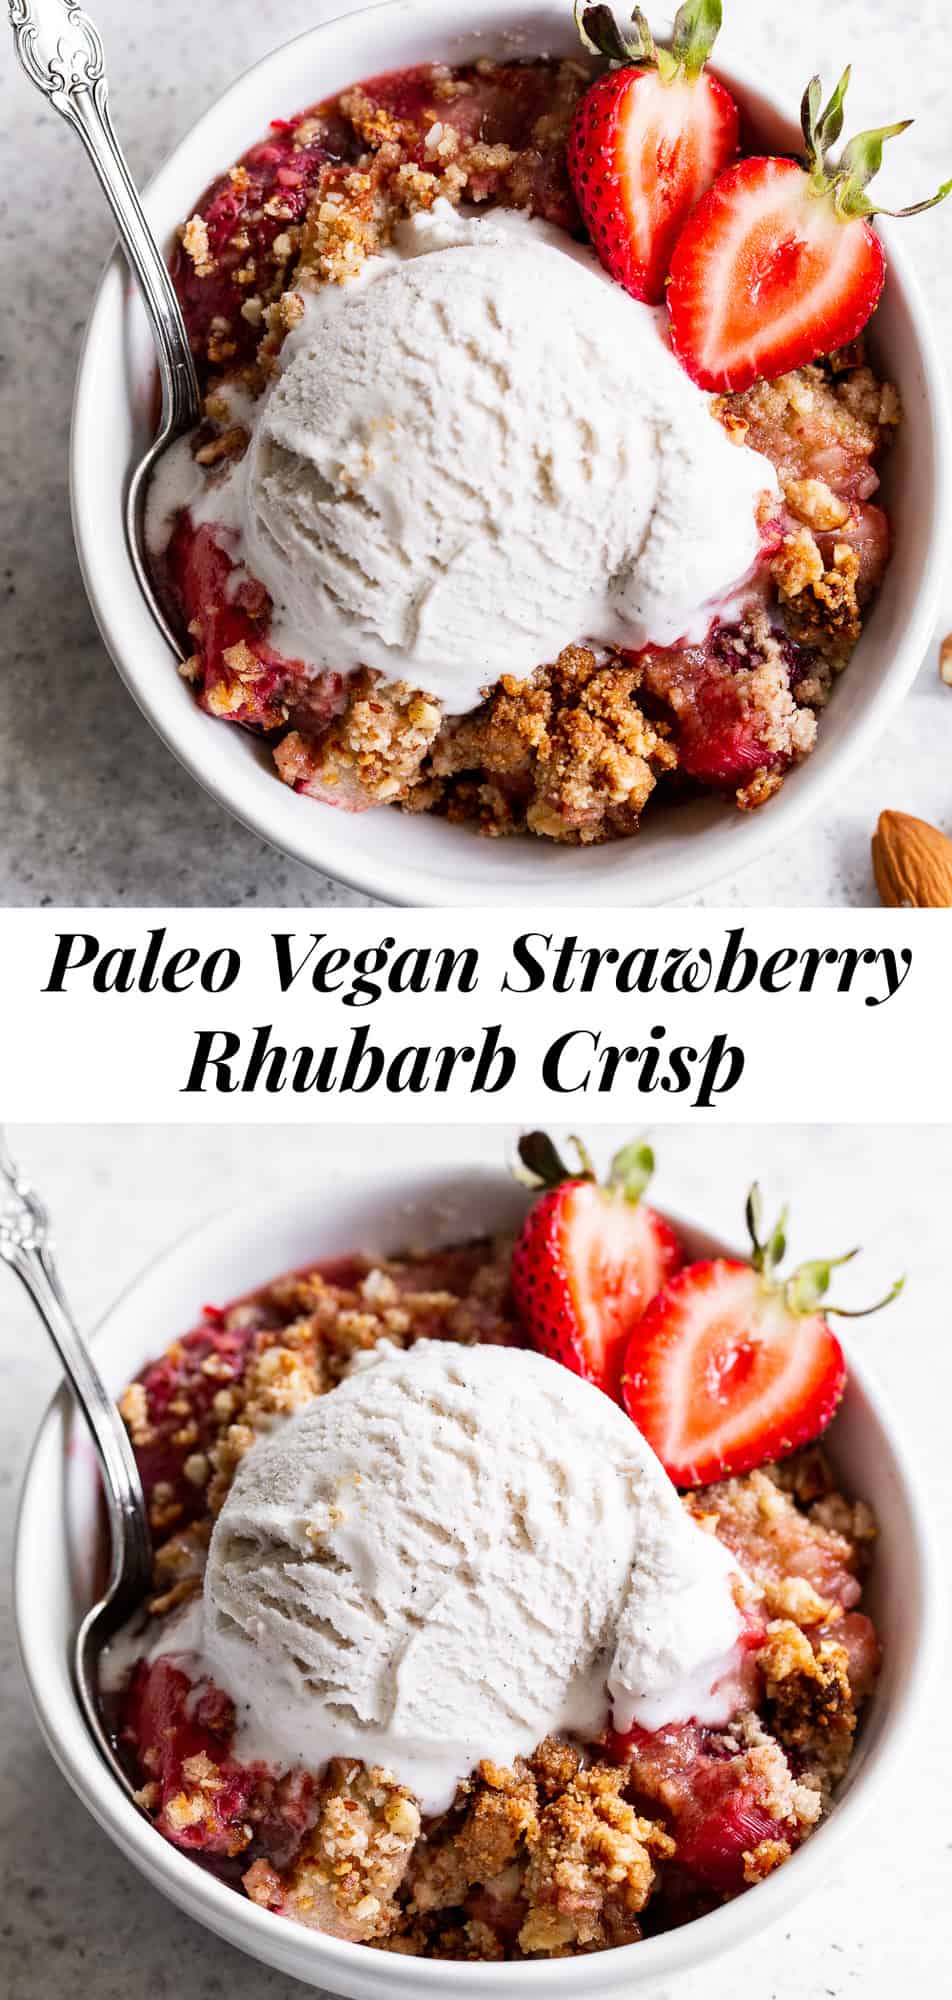 This classic Strawberry Rhubarb Crisp is irresistibly delicious and easy to make!  A sweet tart fruit filling is topped with a toasty crumble for a summer dessert that will make everyone come back for seconds.  It’s paleo, vegan, gluten-free, dairy-free and refined sugar free. #paleo #vegan #cleaneating #strawberryrhubarb 